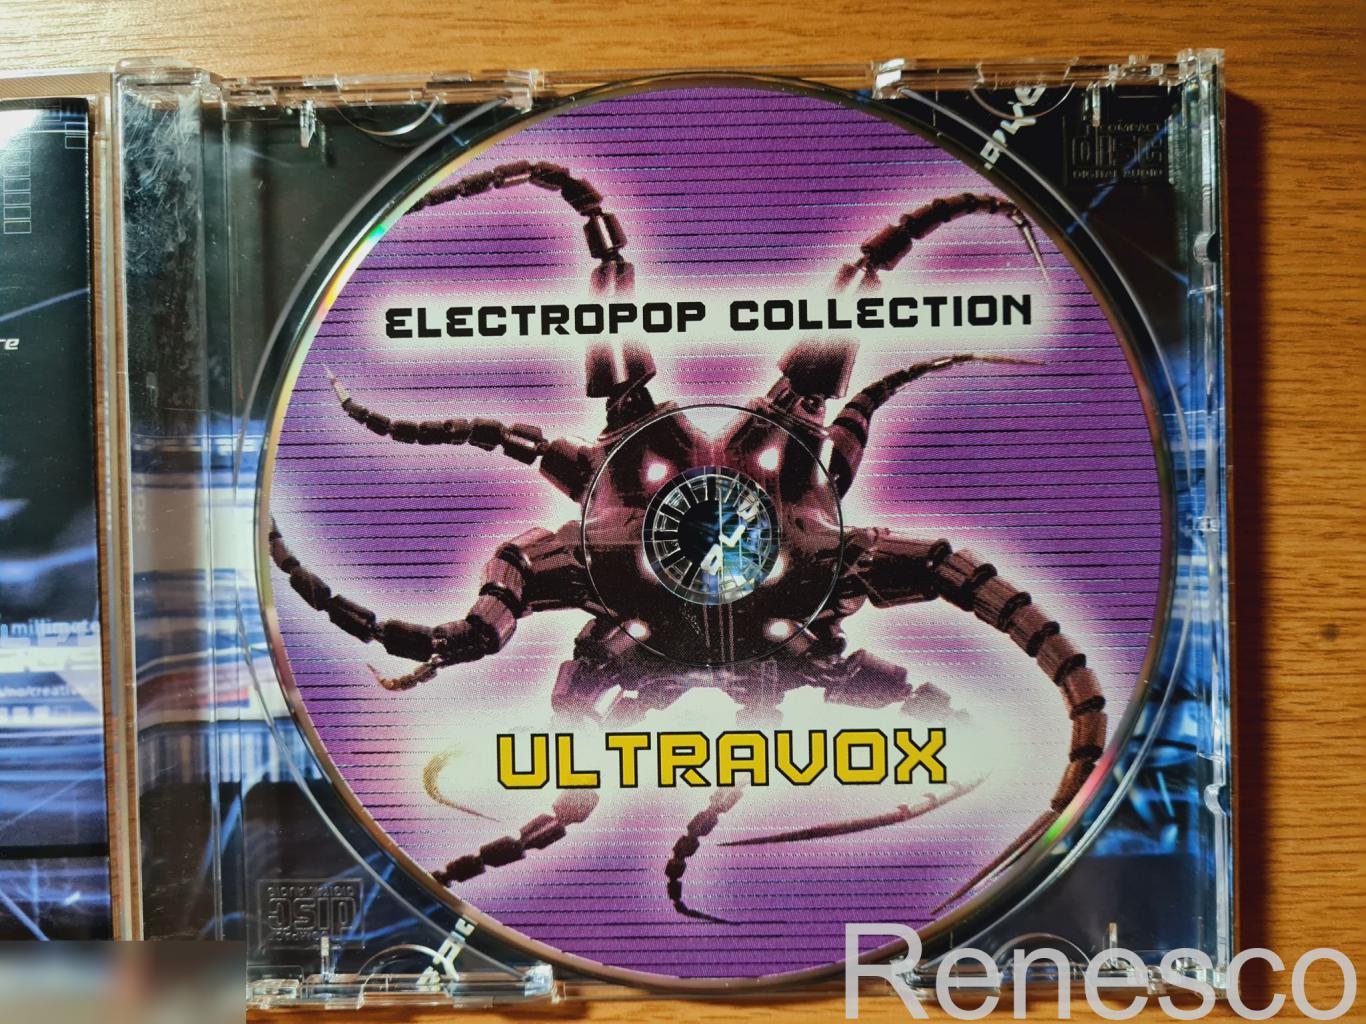 Ultravox ?– Electropop Collection (Russia) (2001) (Unofficial Release) 4